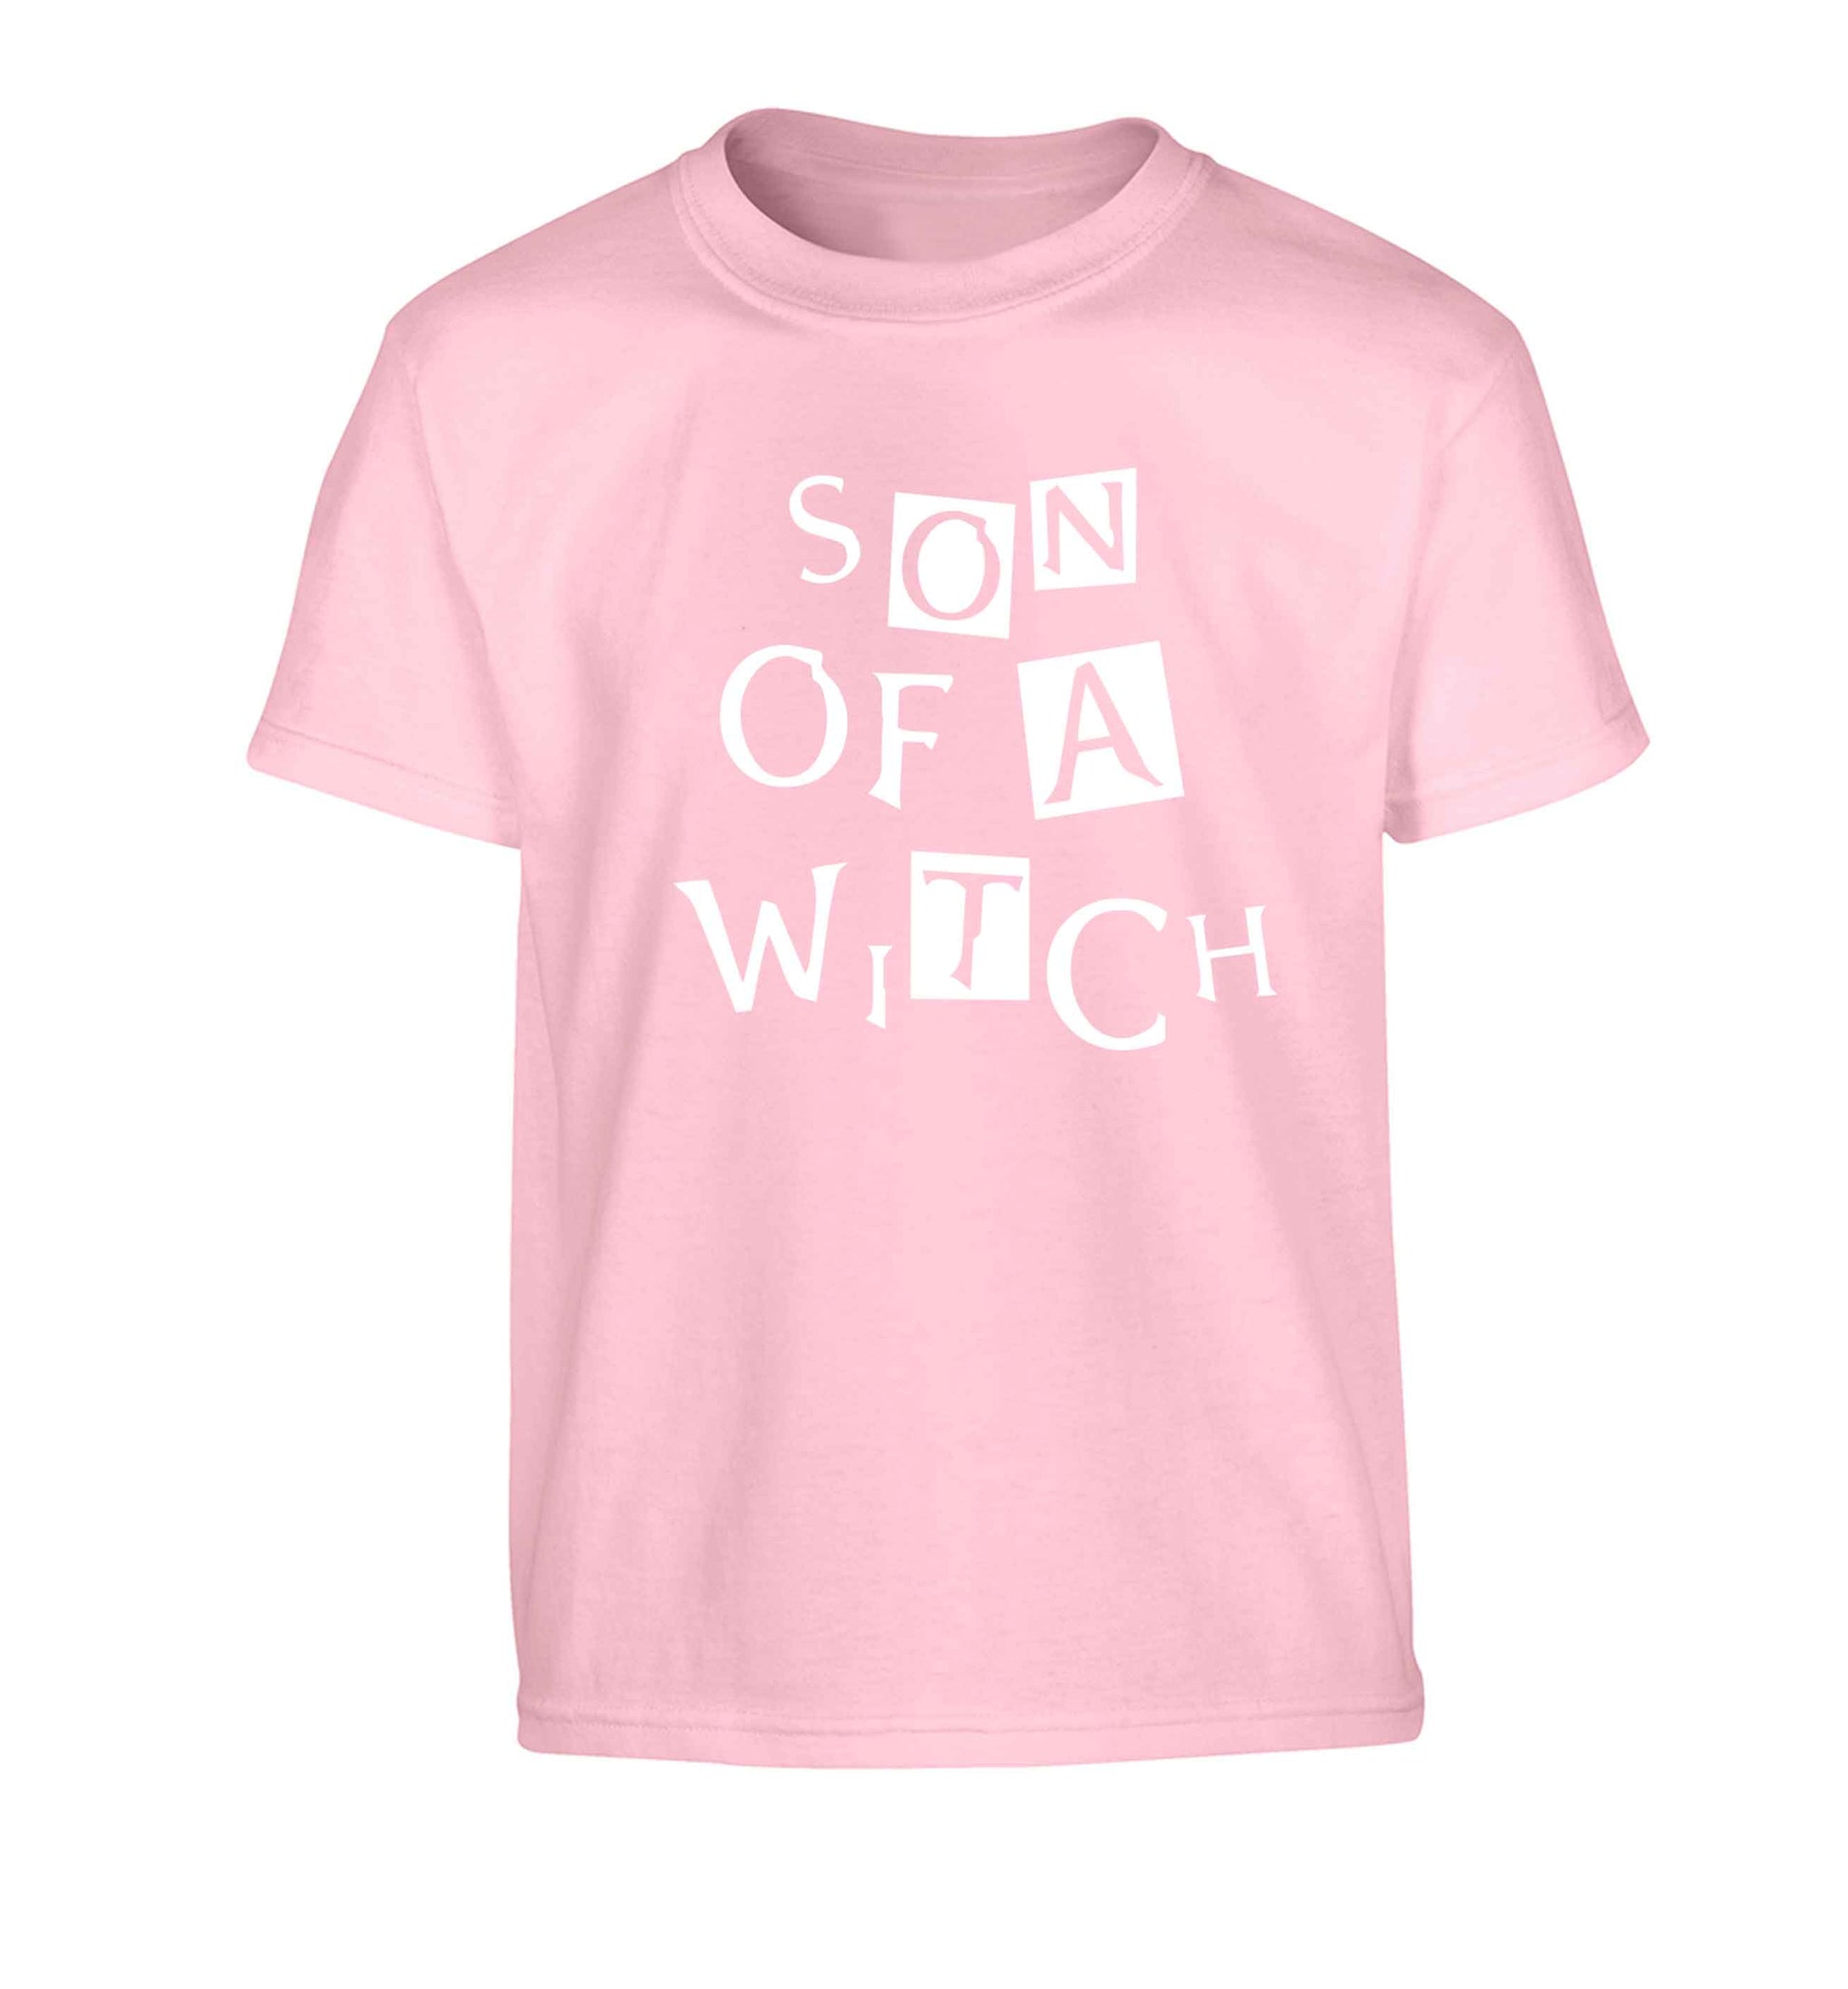 Son of a witch Children's light pink Tshirt 12-13 Years